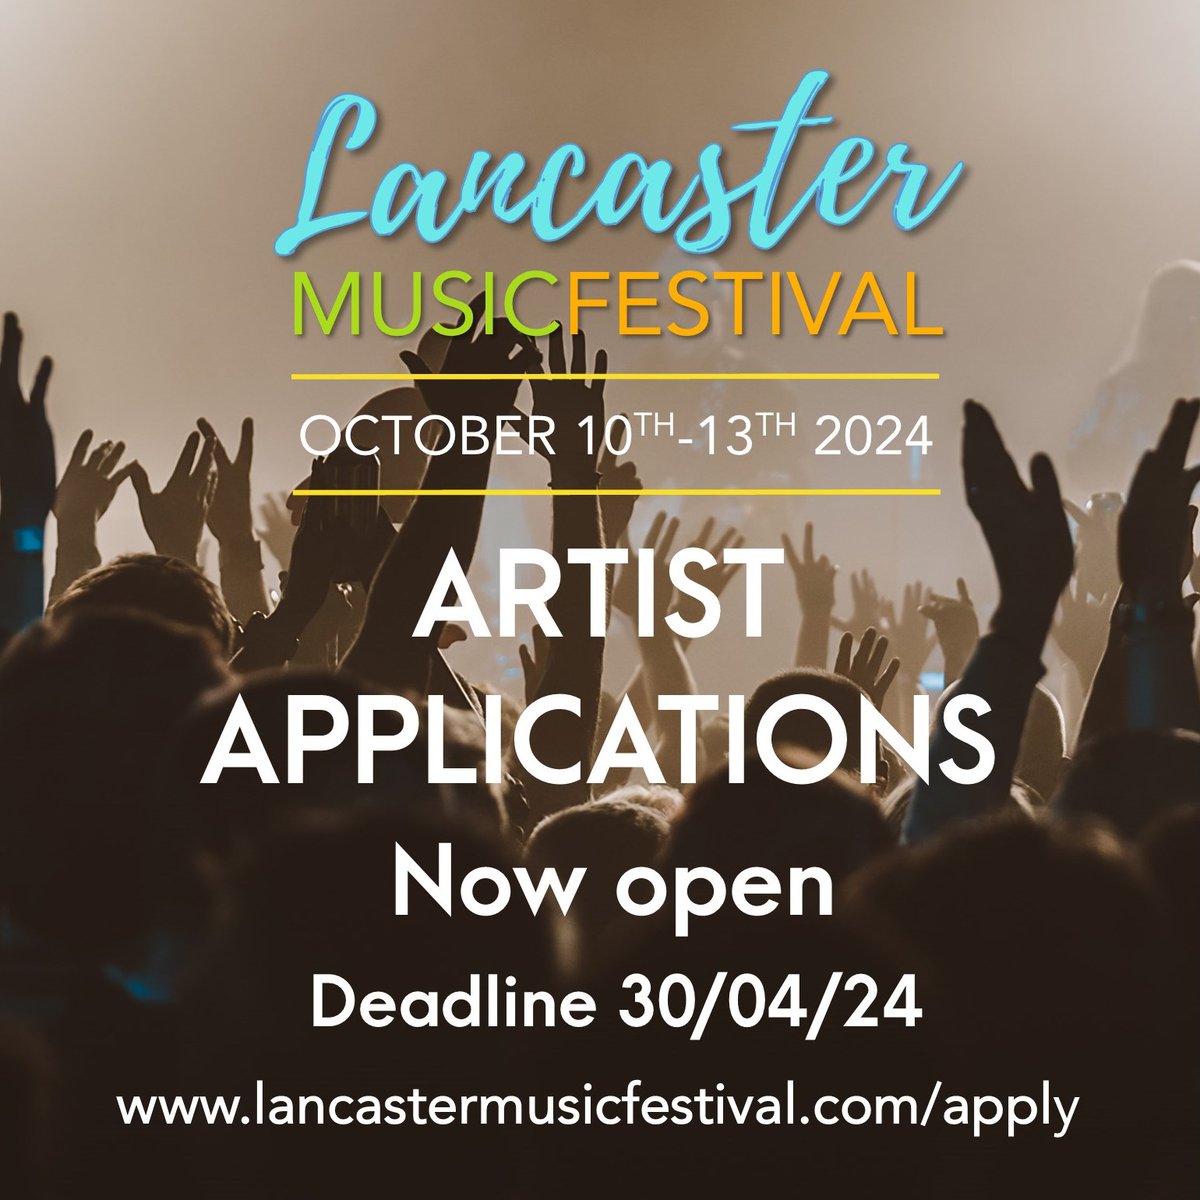 Don't miss out! The deadline is approaching to perform at Lancaster Music Festival 2024... tinyurl.com/kxryytfm